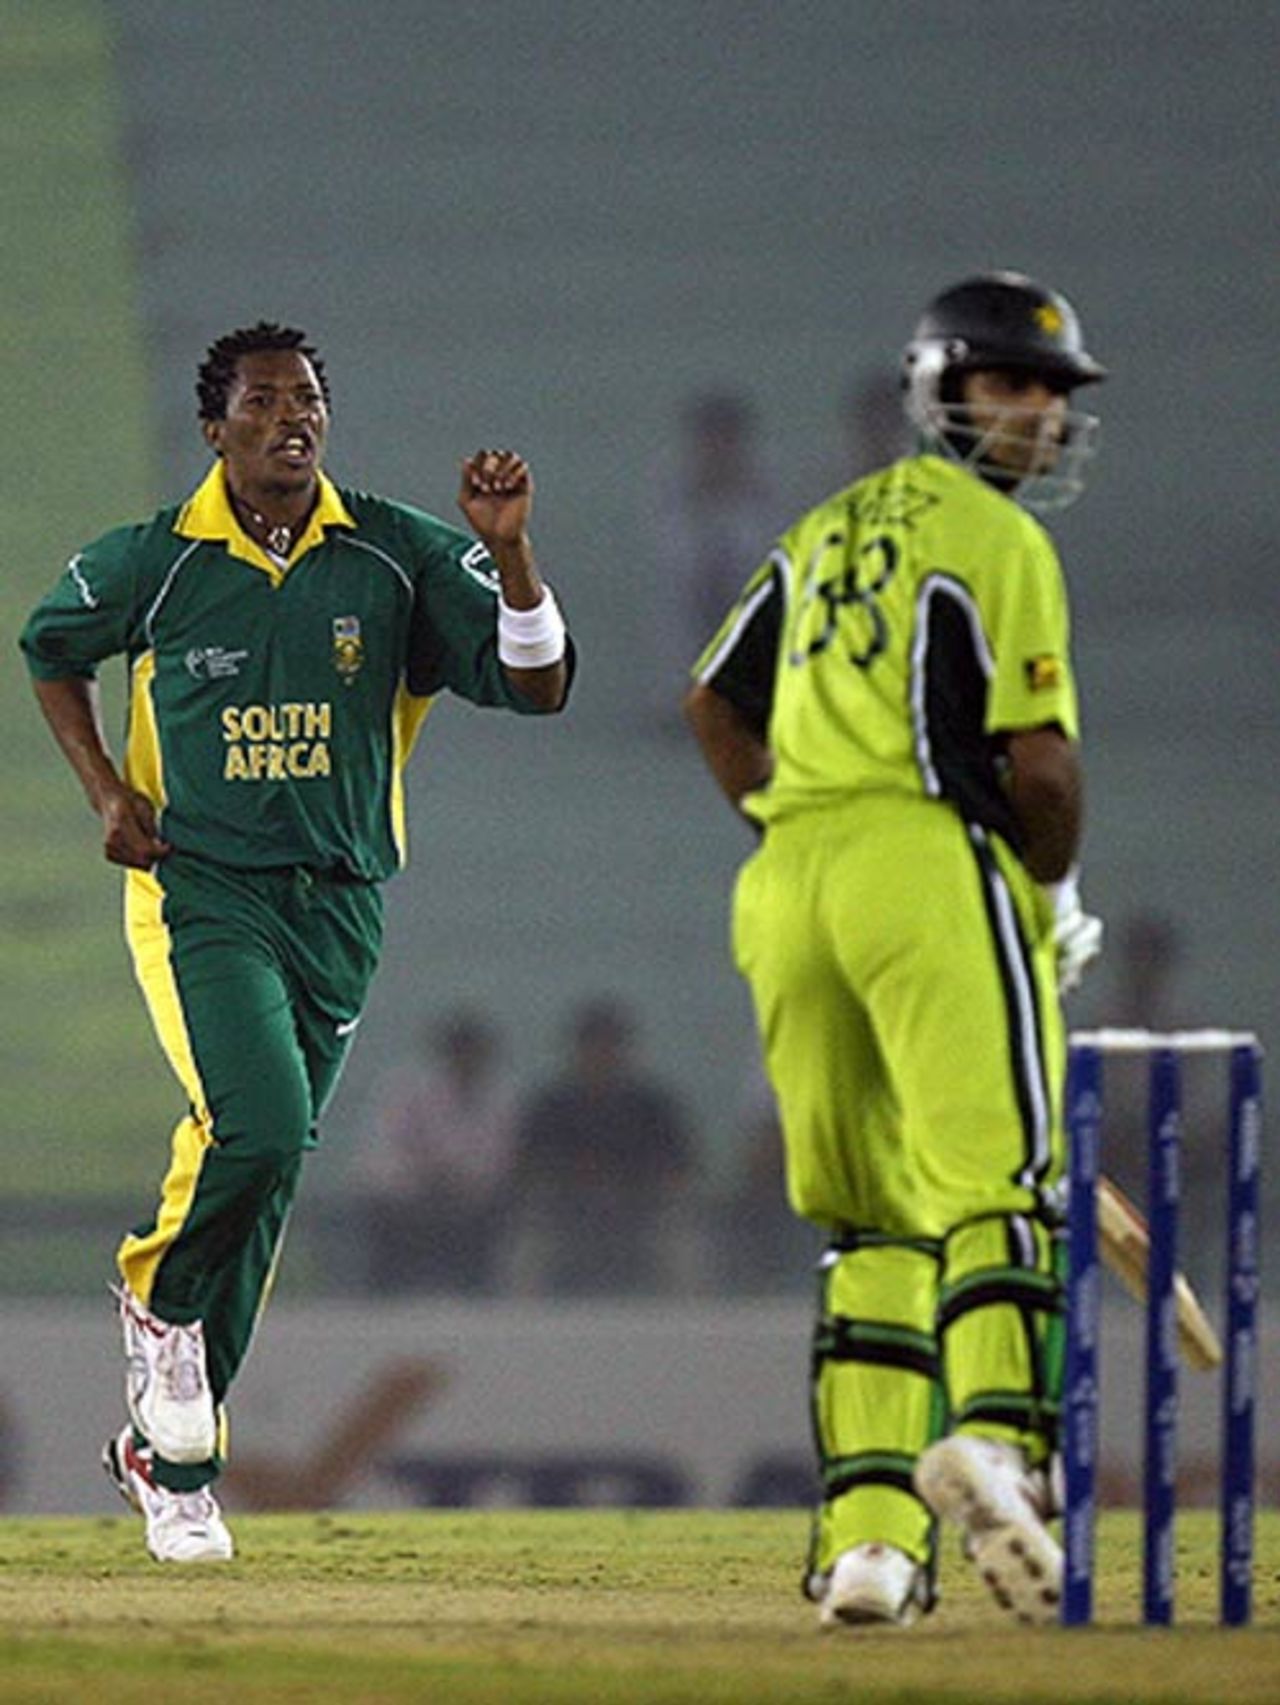 Makhaya Ntini celebrates after taking Mohammad Hafeez's wicket from just his second ball, Pakistan v South Africa, Champions Trophy, Mohali, October 27, 2006